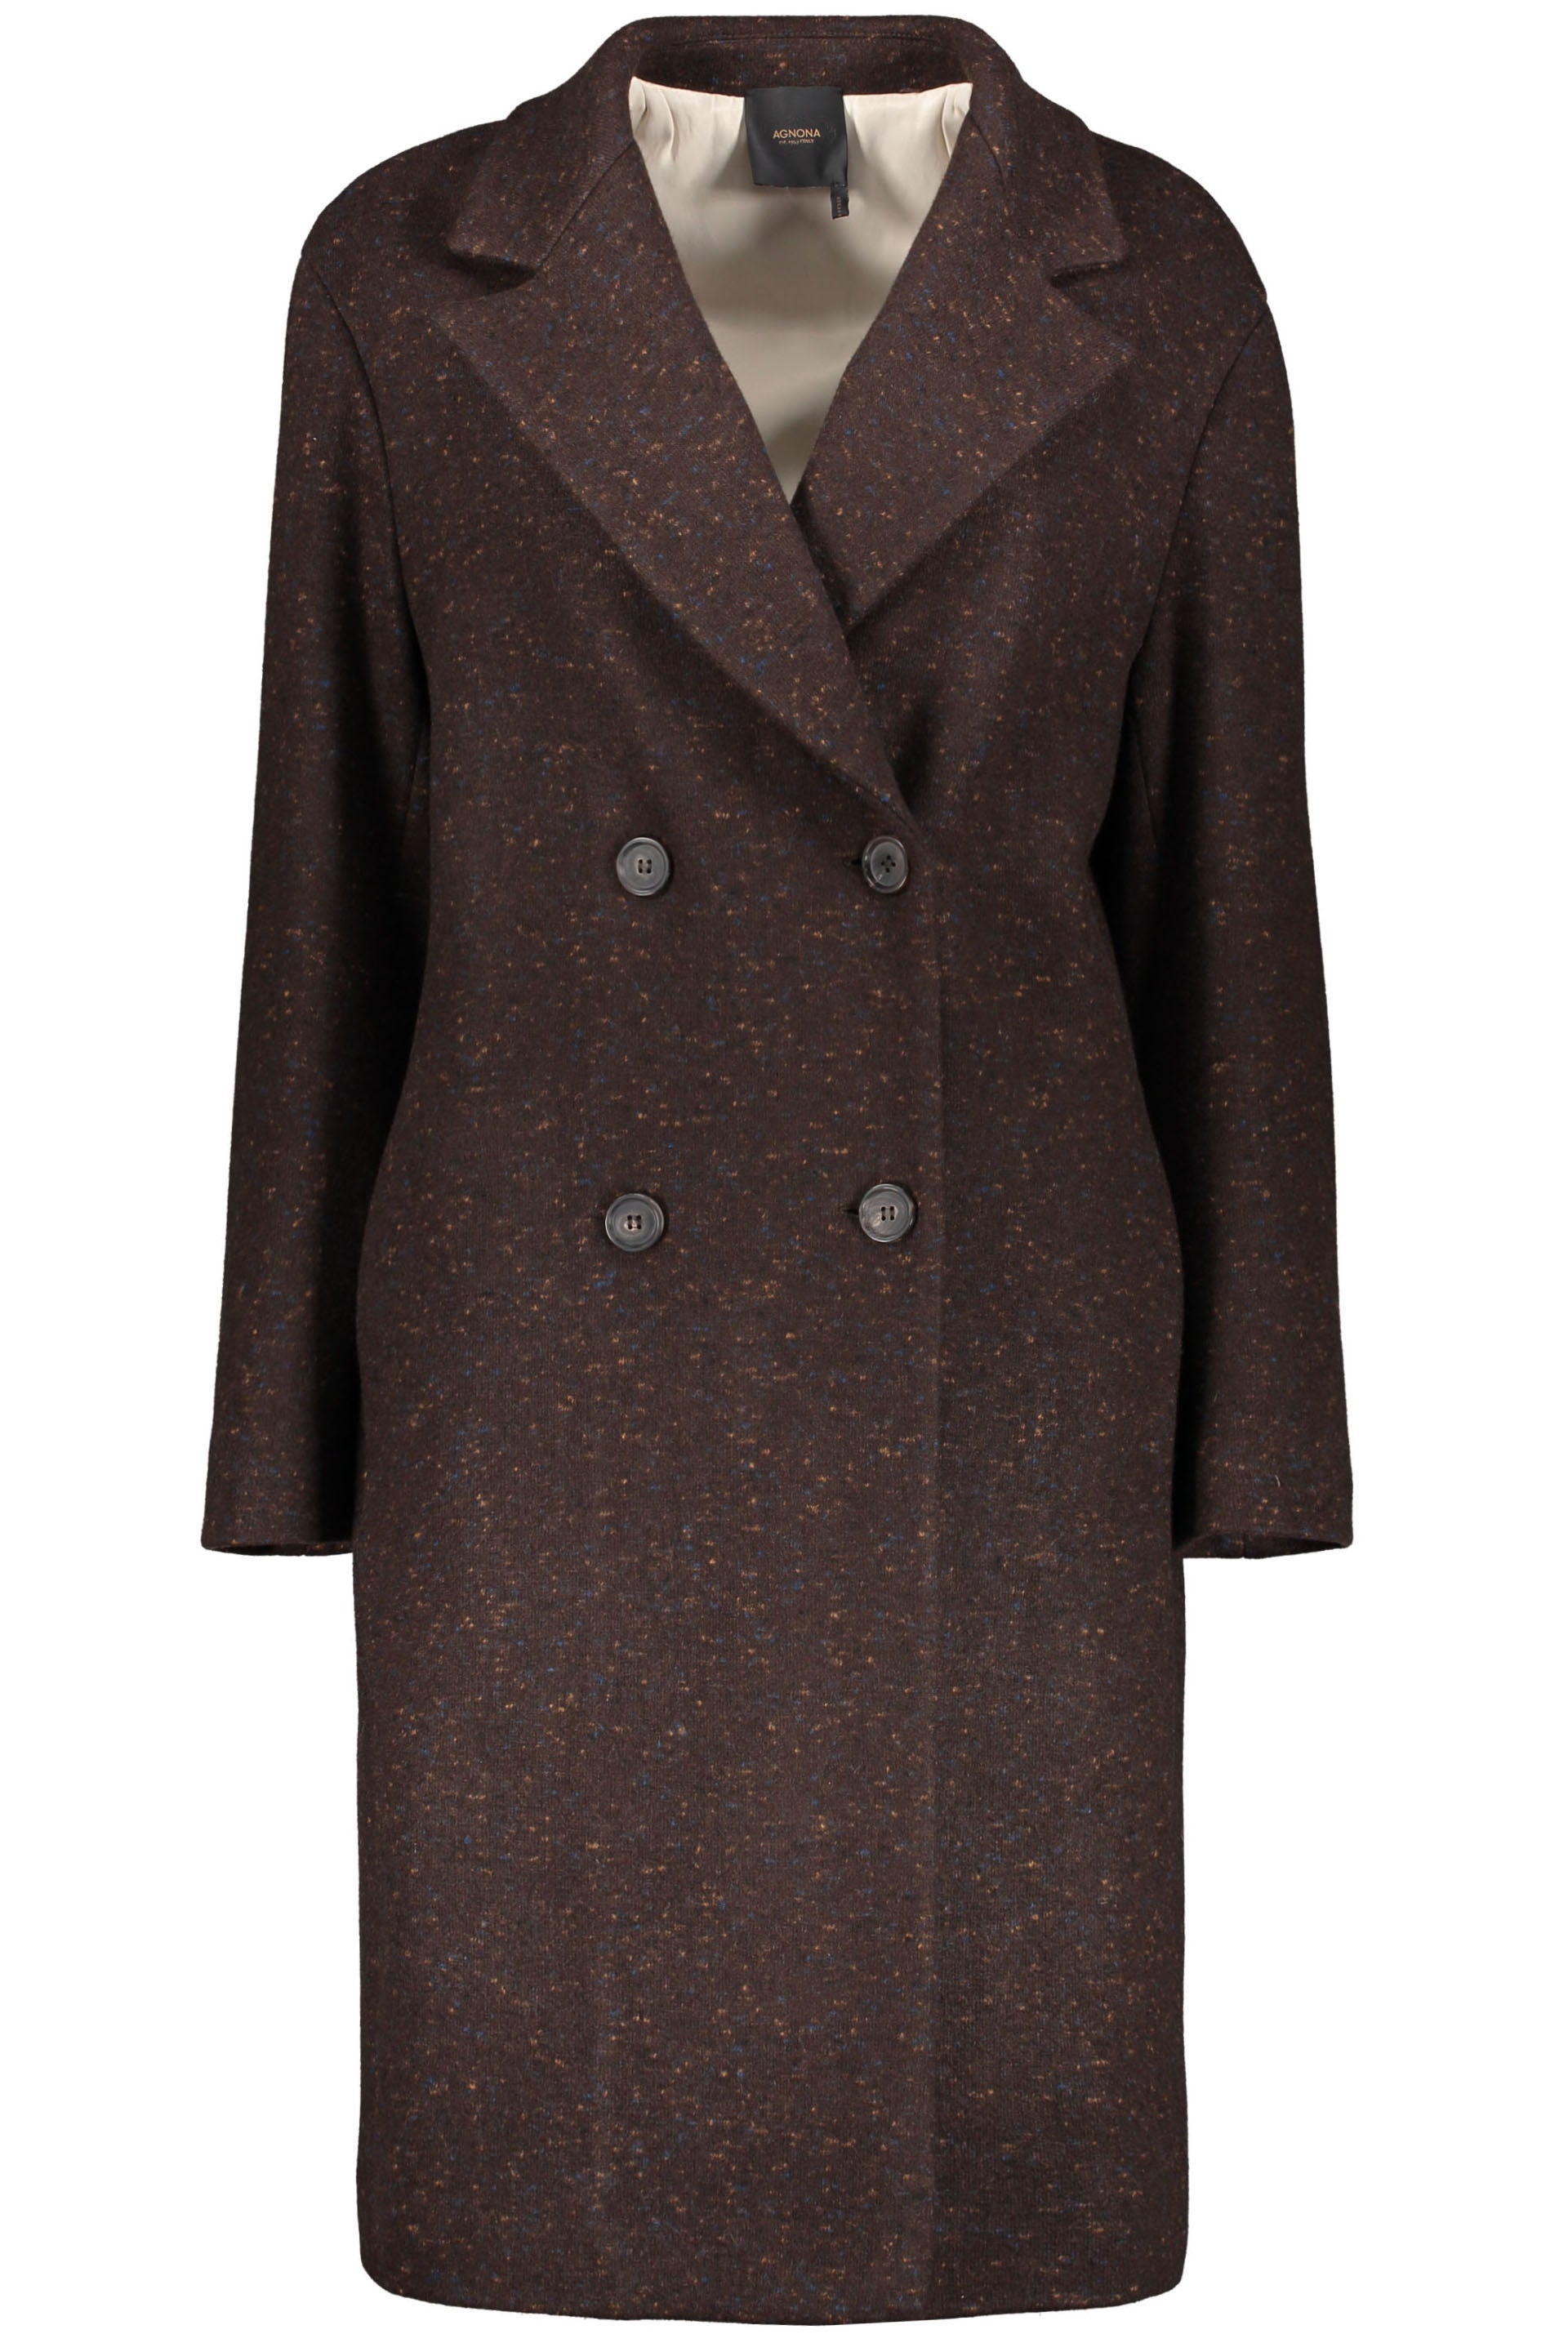 Agnona-OUTLET-SALE-Double-breasted-cashmere-coat-Jacken-Mantel-ARCHIVE-COLLECTION-2_58ffd1b9-99e6-4f19-bdb5-15173f475219.jpg